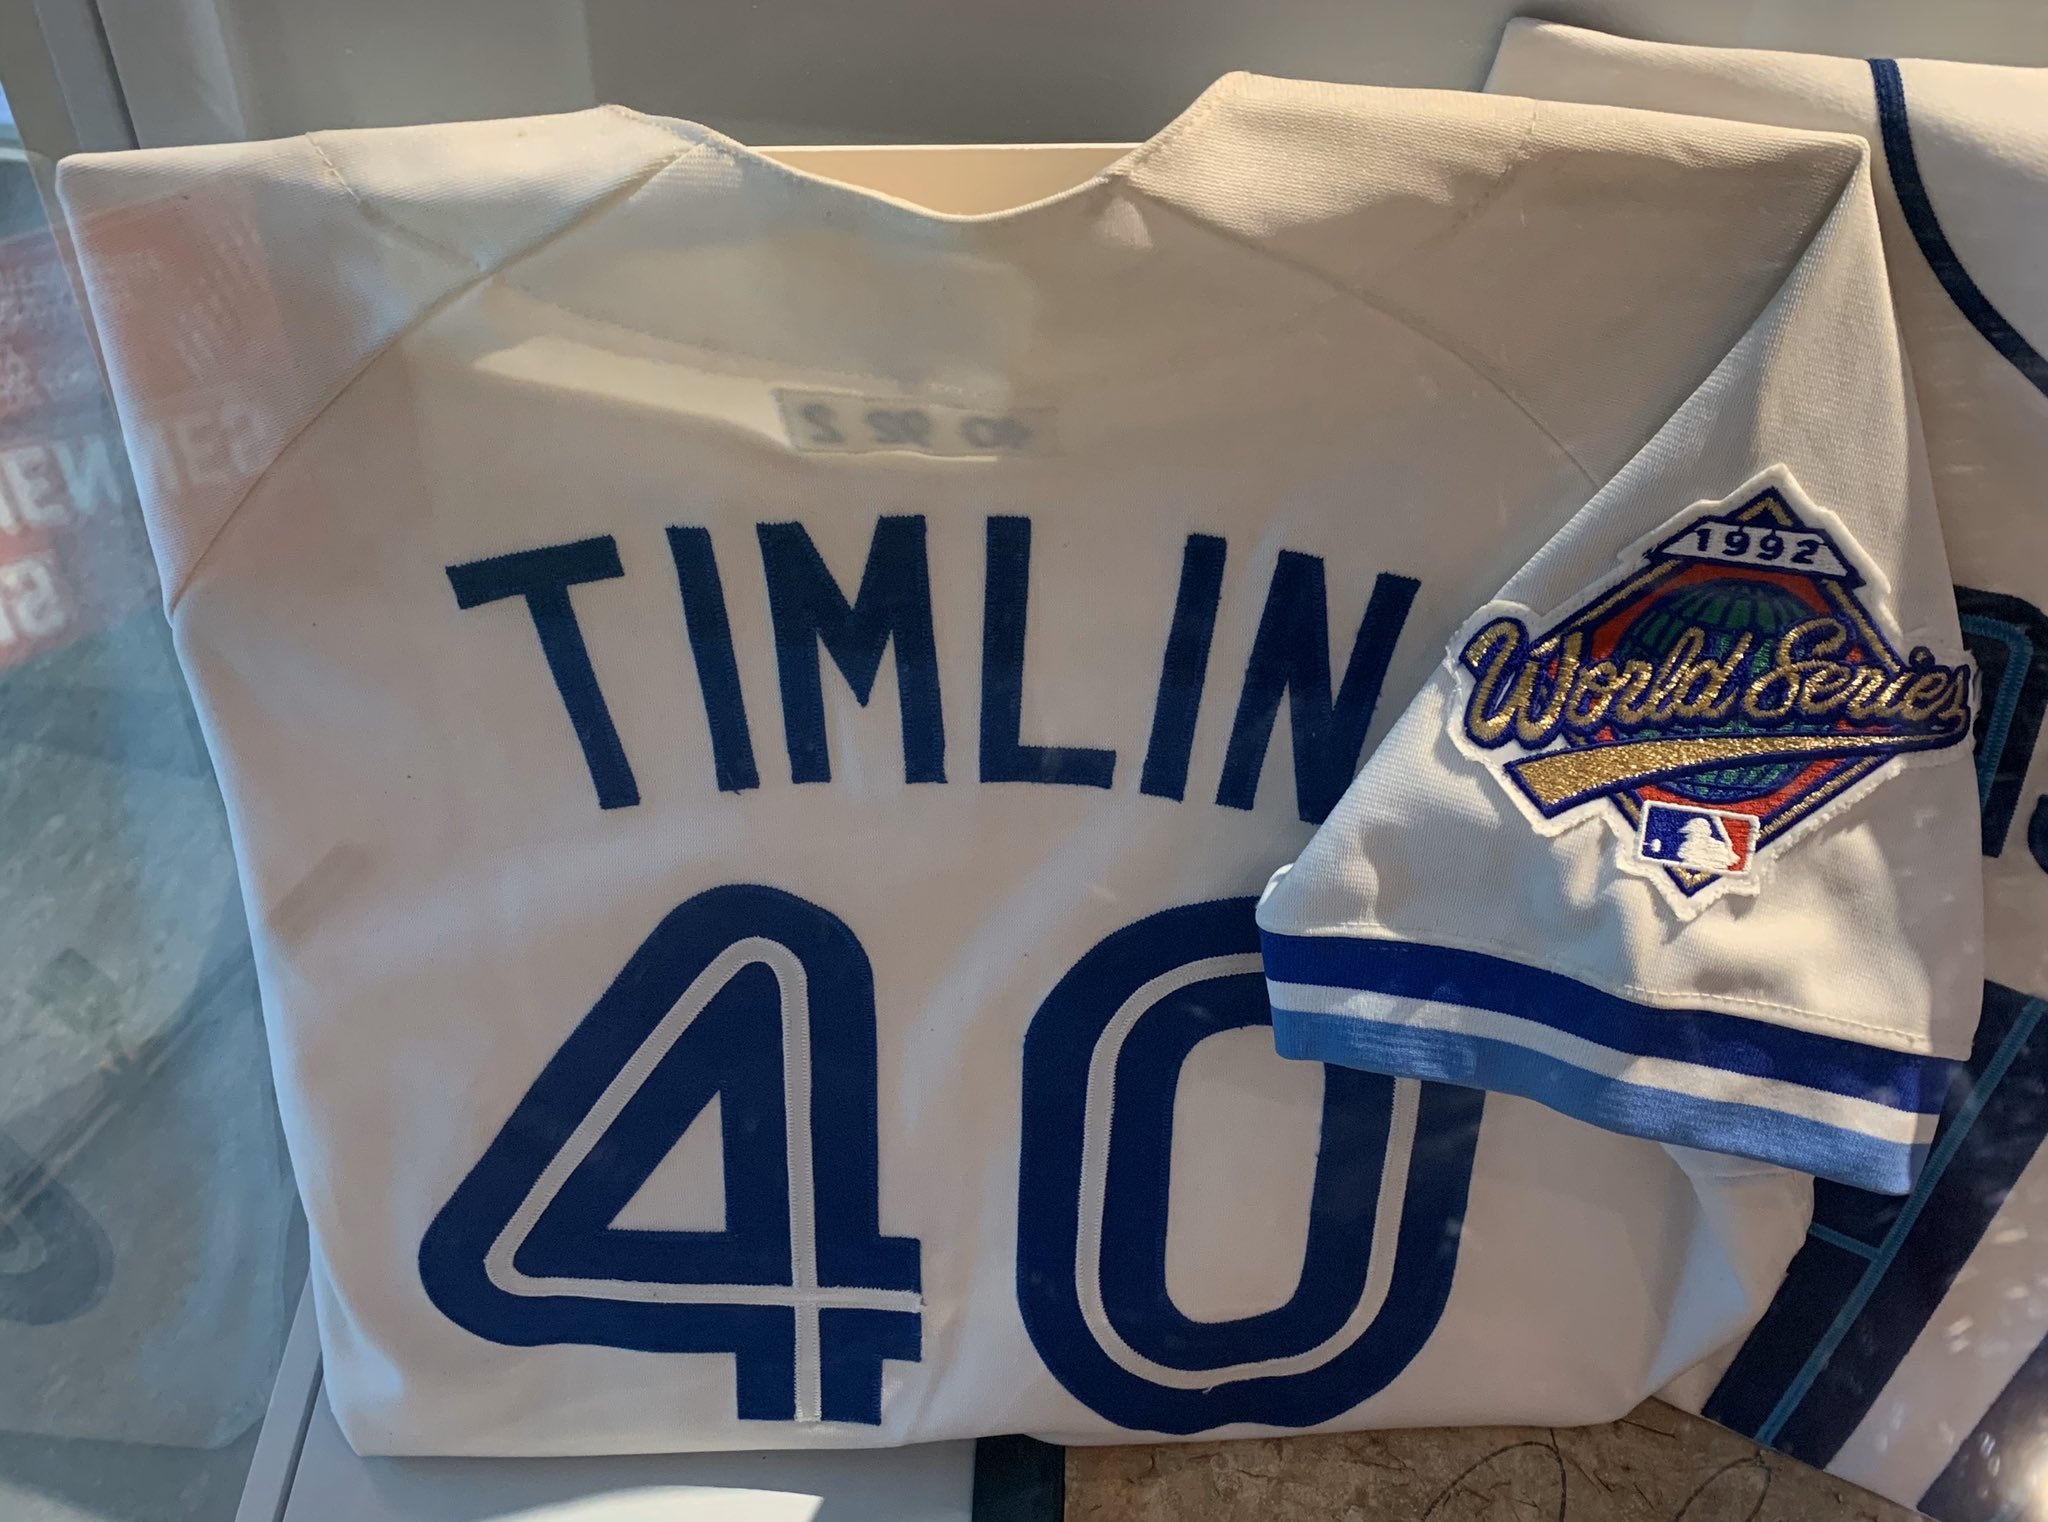 Canadian Baseball Hall of Fame and Museum 🇨🇦⚾️ on X: With all the @BlueJays  1992 World Series games on @Sportsnet I thought I would show you Mike  Timlin's game 5 1992 WS